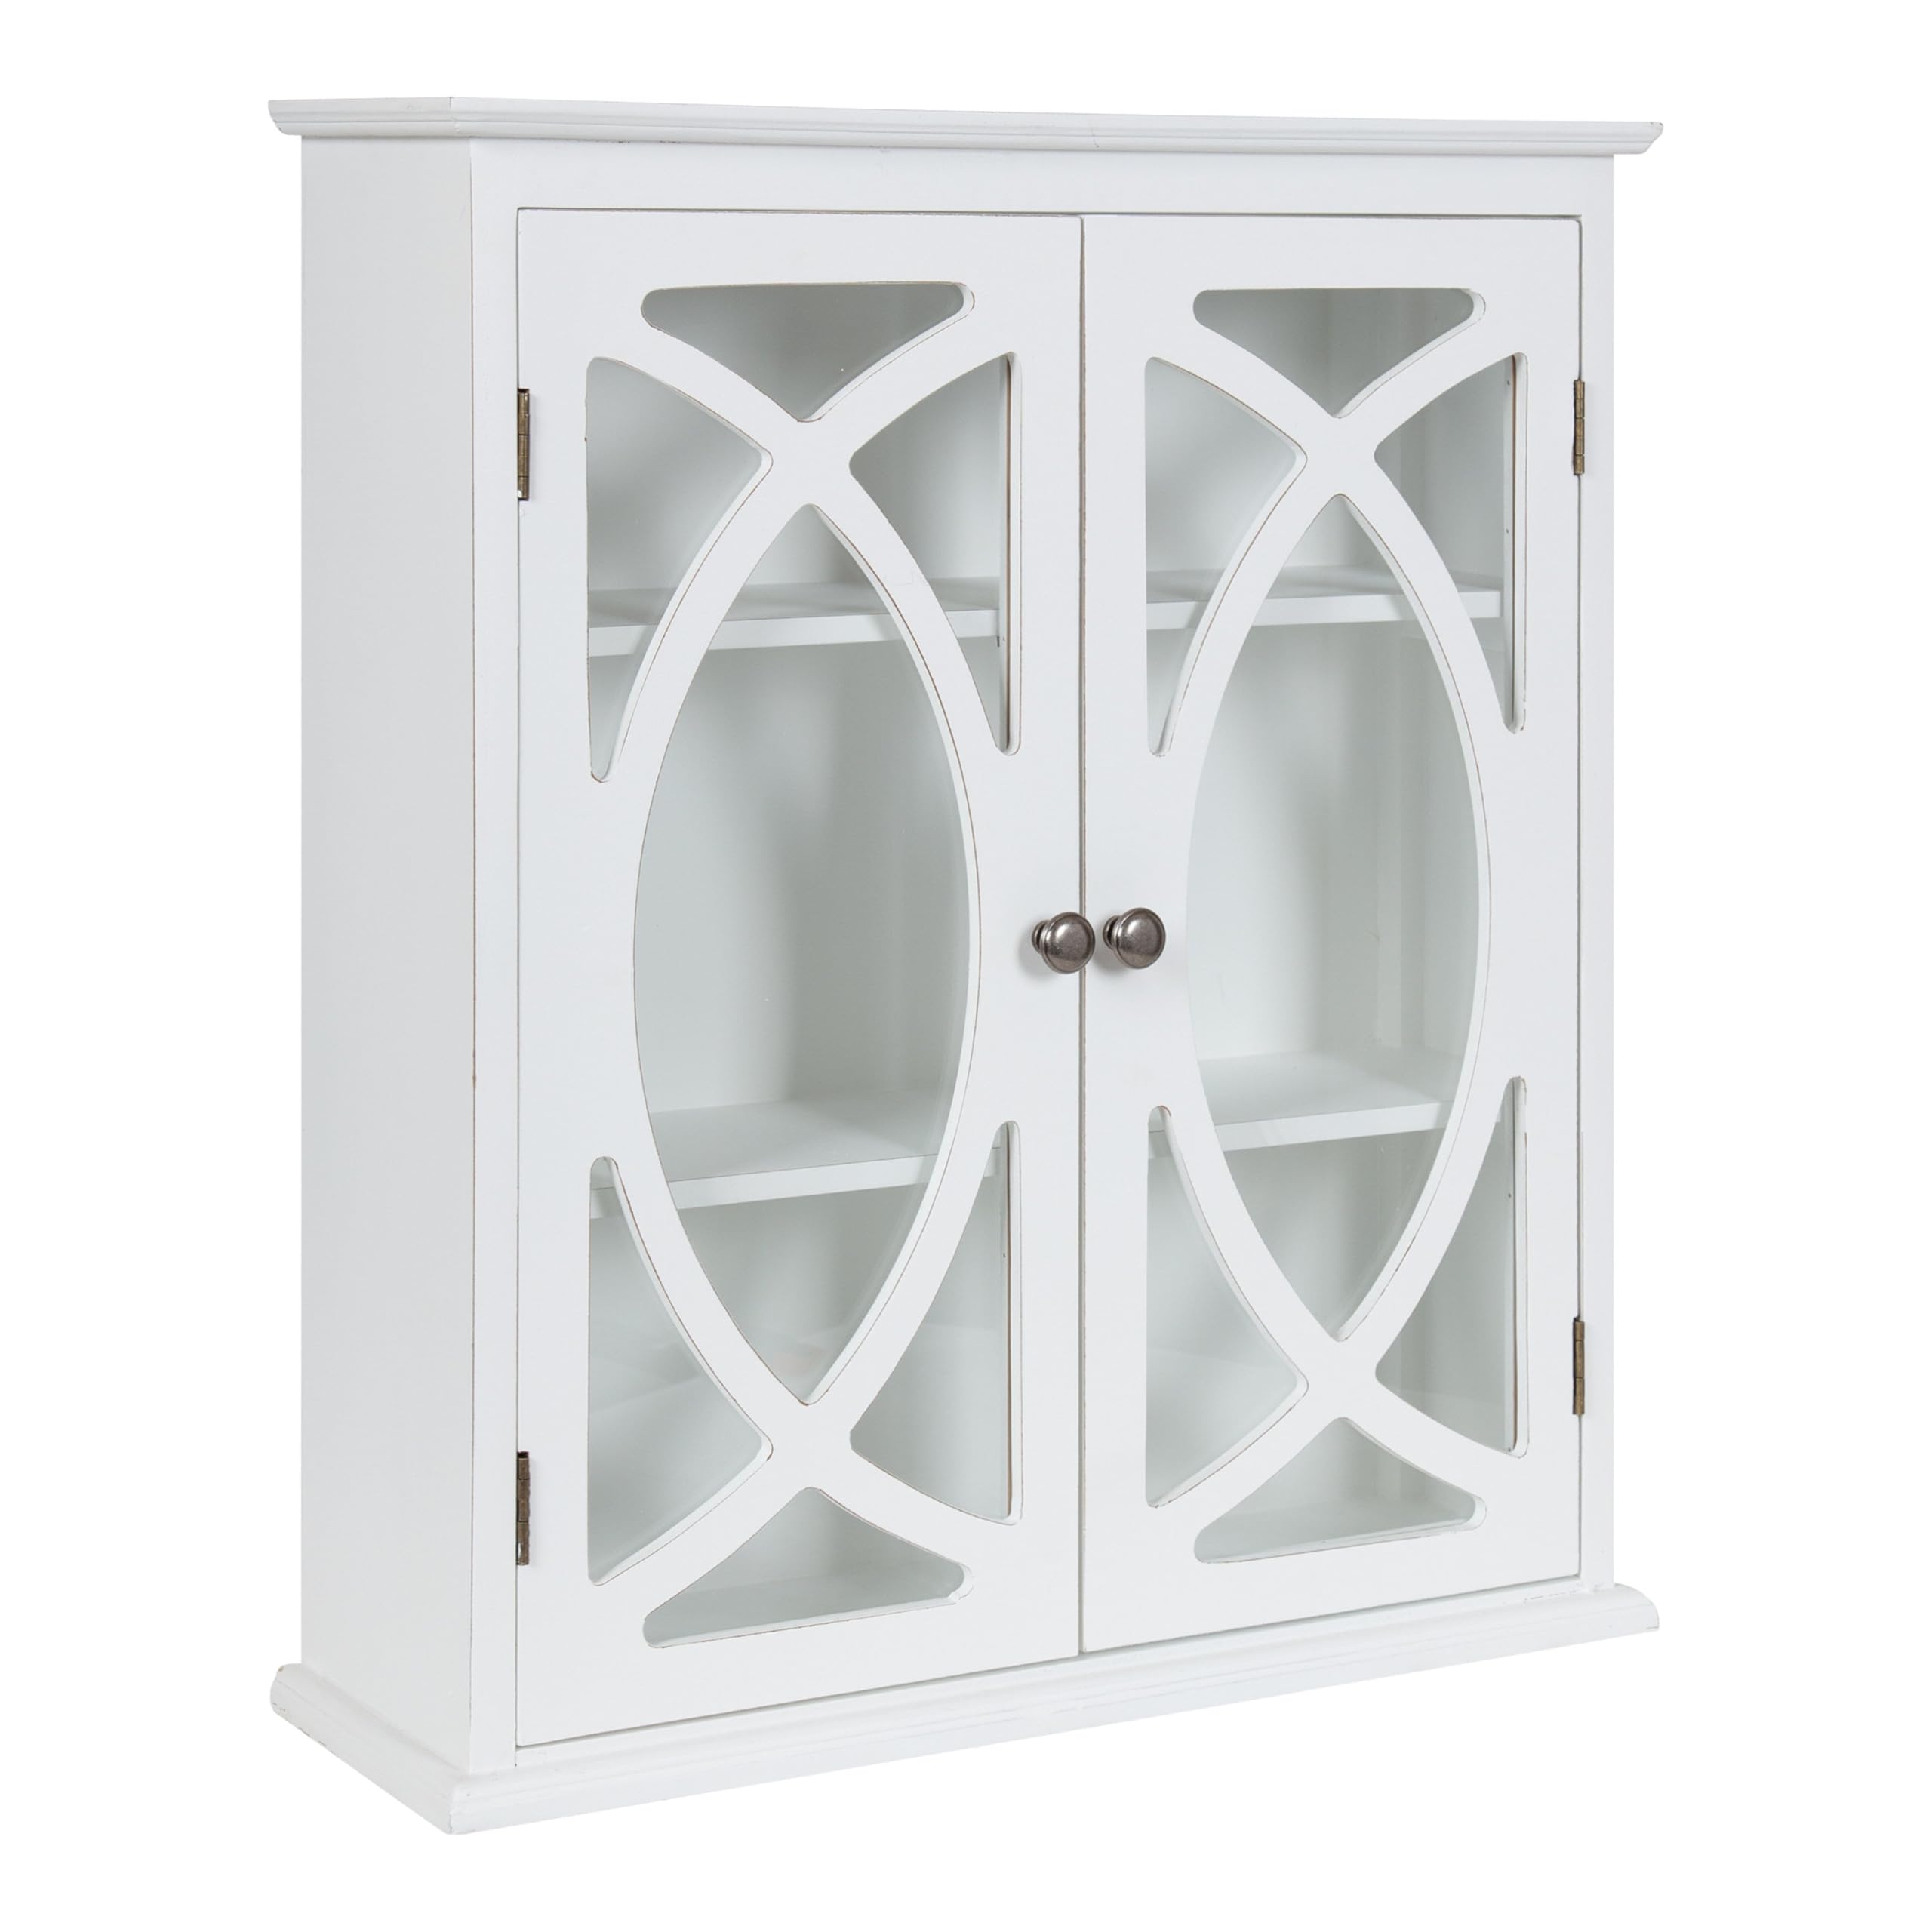 Kate and Laurel Quinlan Wood Wall Cabinet, 24 x 8 x 28, White, Decorative Traditional Storage Cabinet with Two Glass Doors and Three Interior Shelves